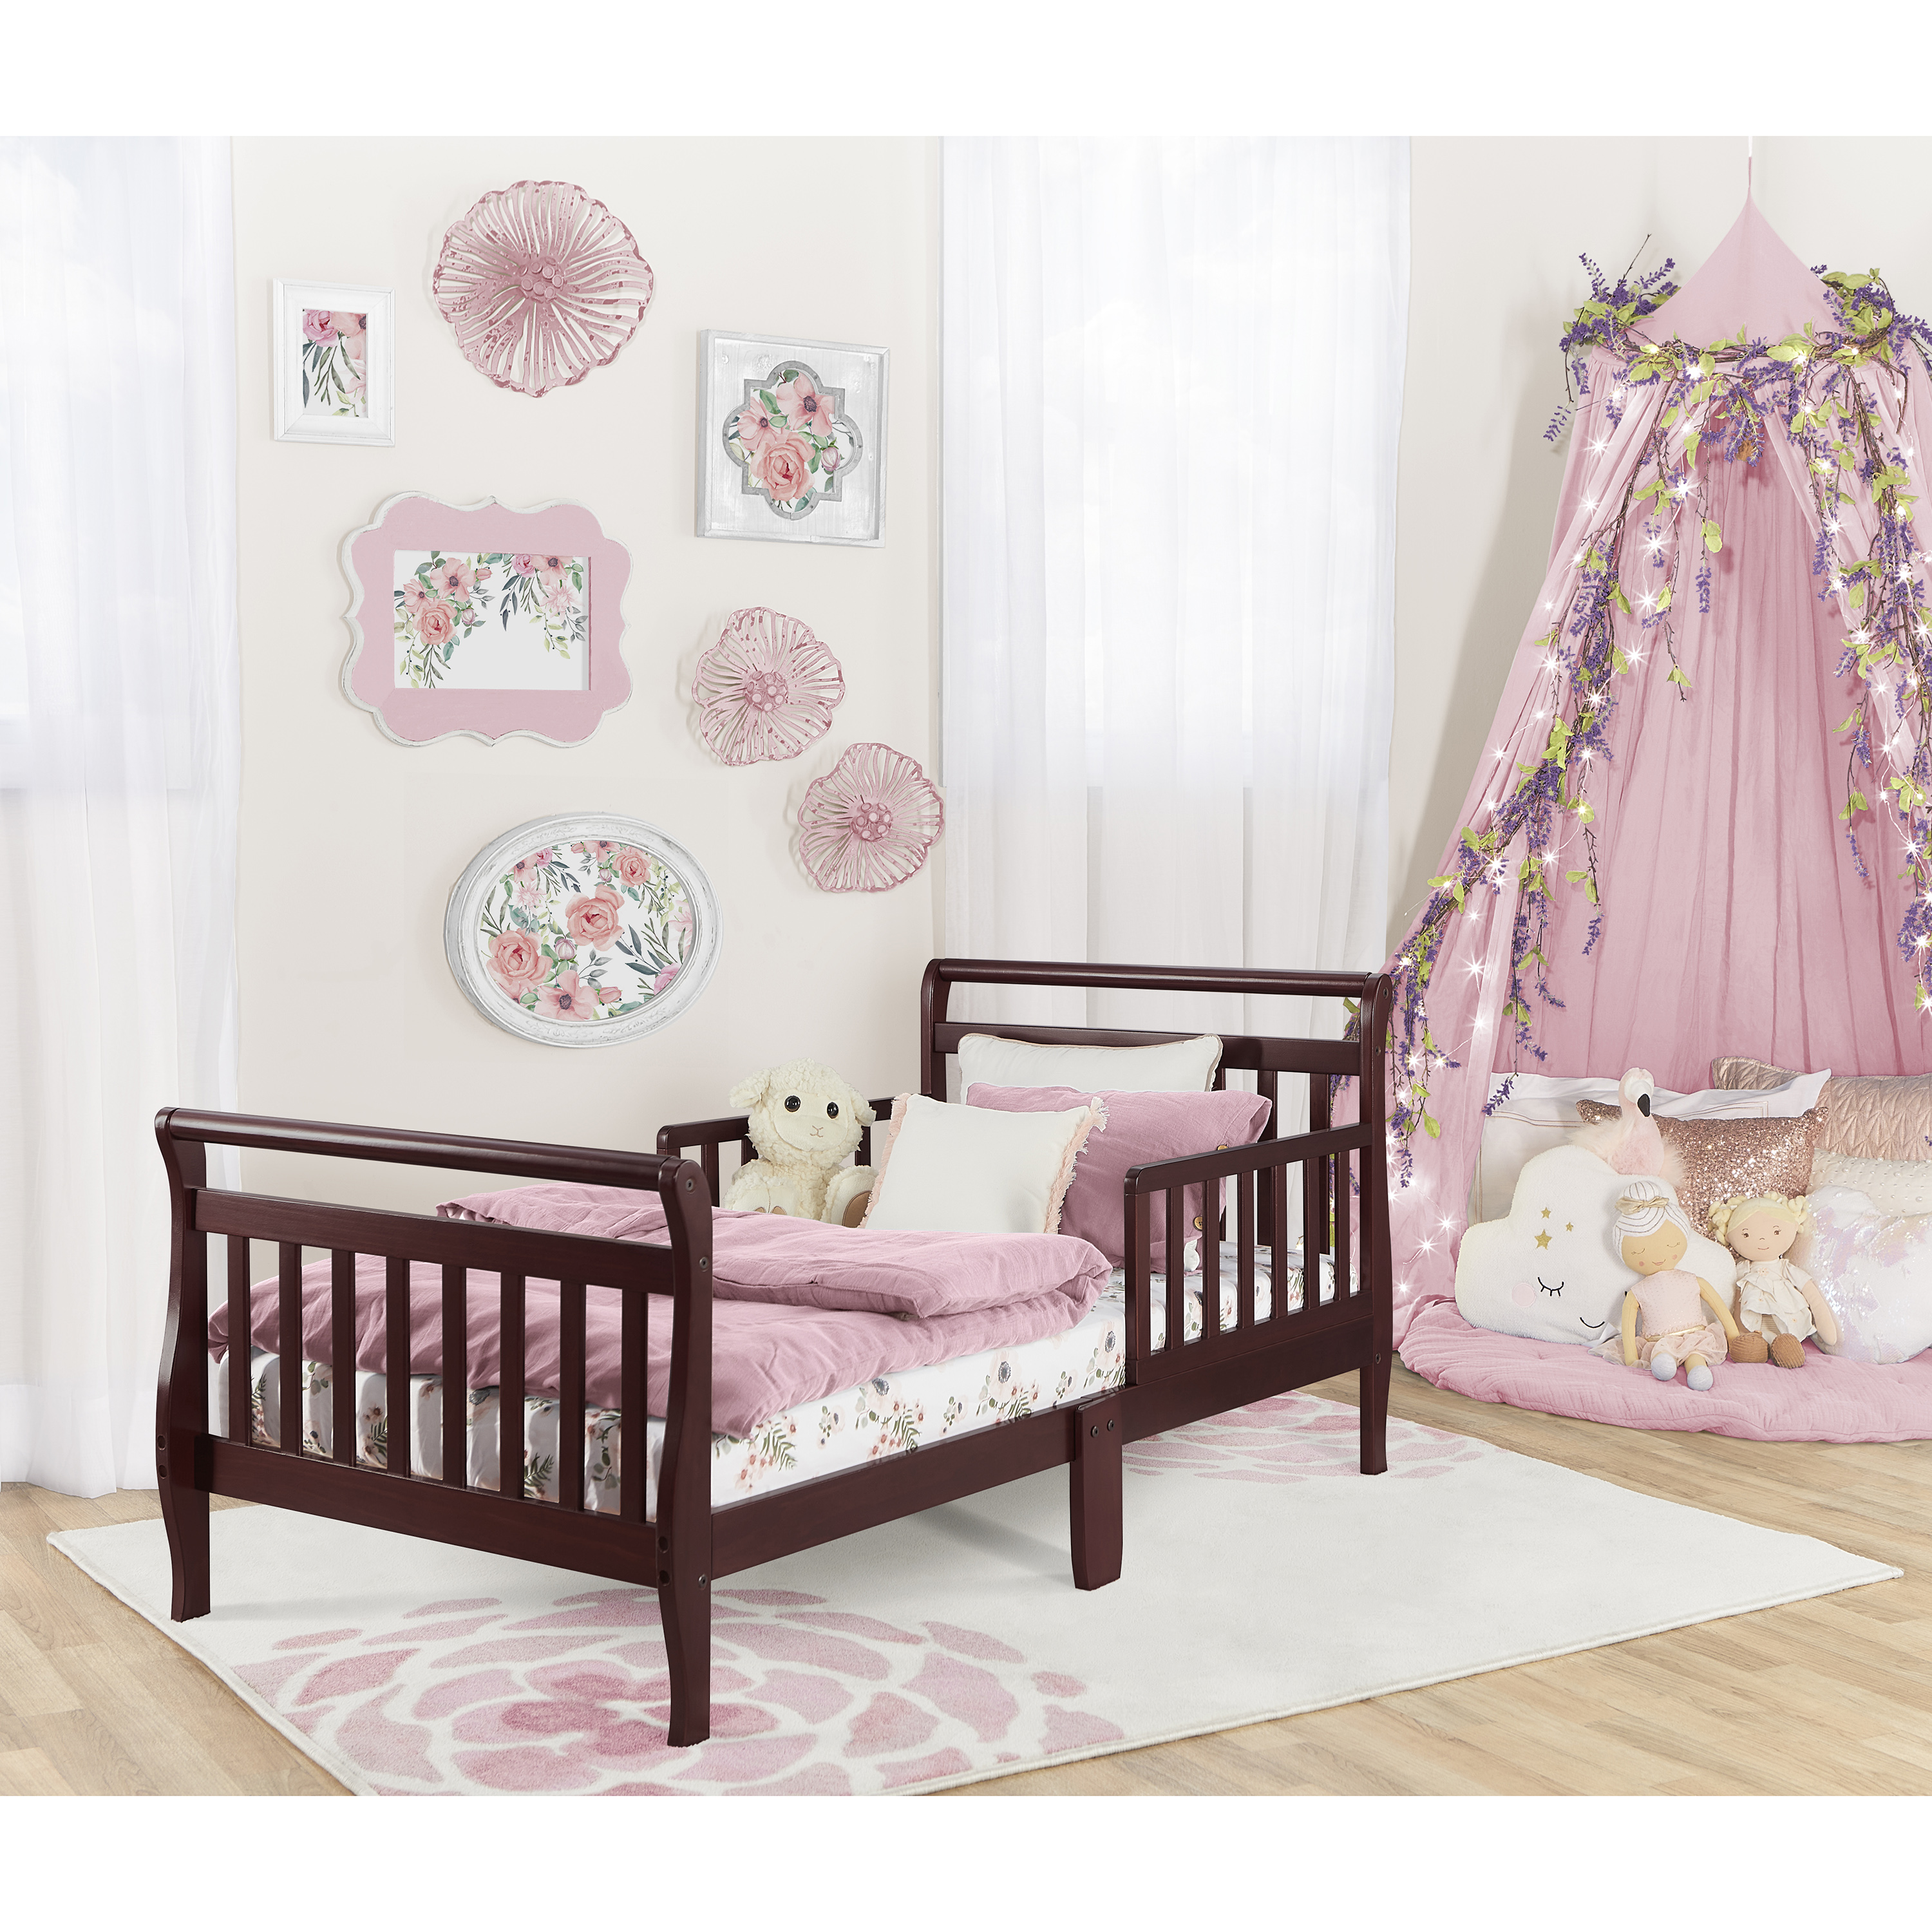 Dream On Me, Sleigh Toddler Bed, Cherry, Model #642-C - image 2 of 14